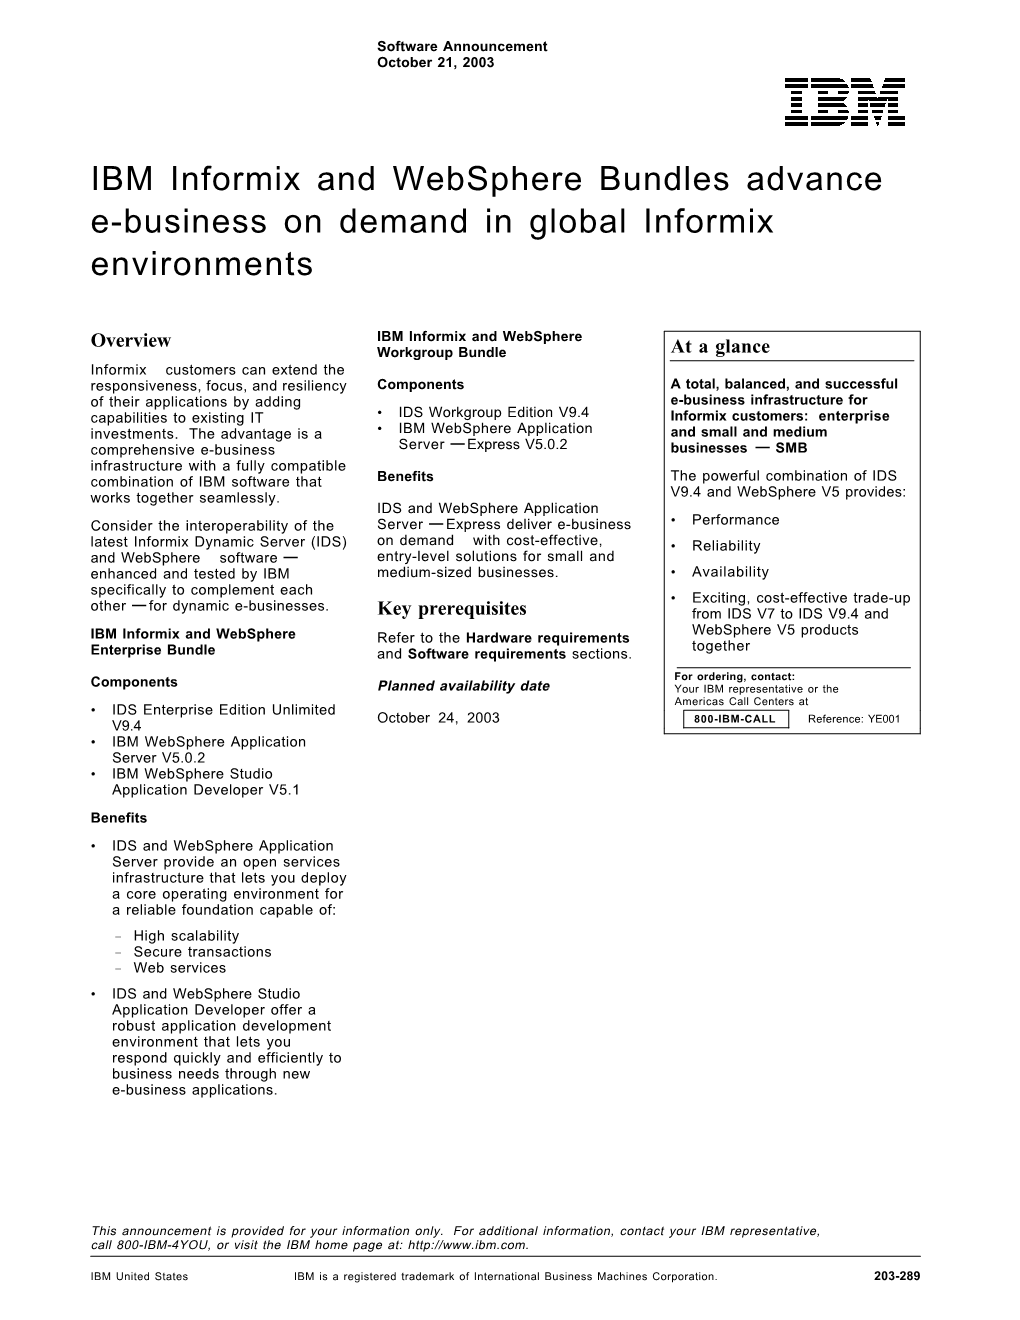 IBM Informix and Websphere Bundles Advance E-Business on Demand in Global Informix Environments